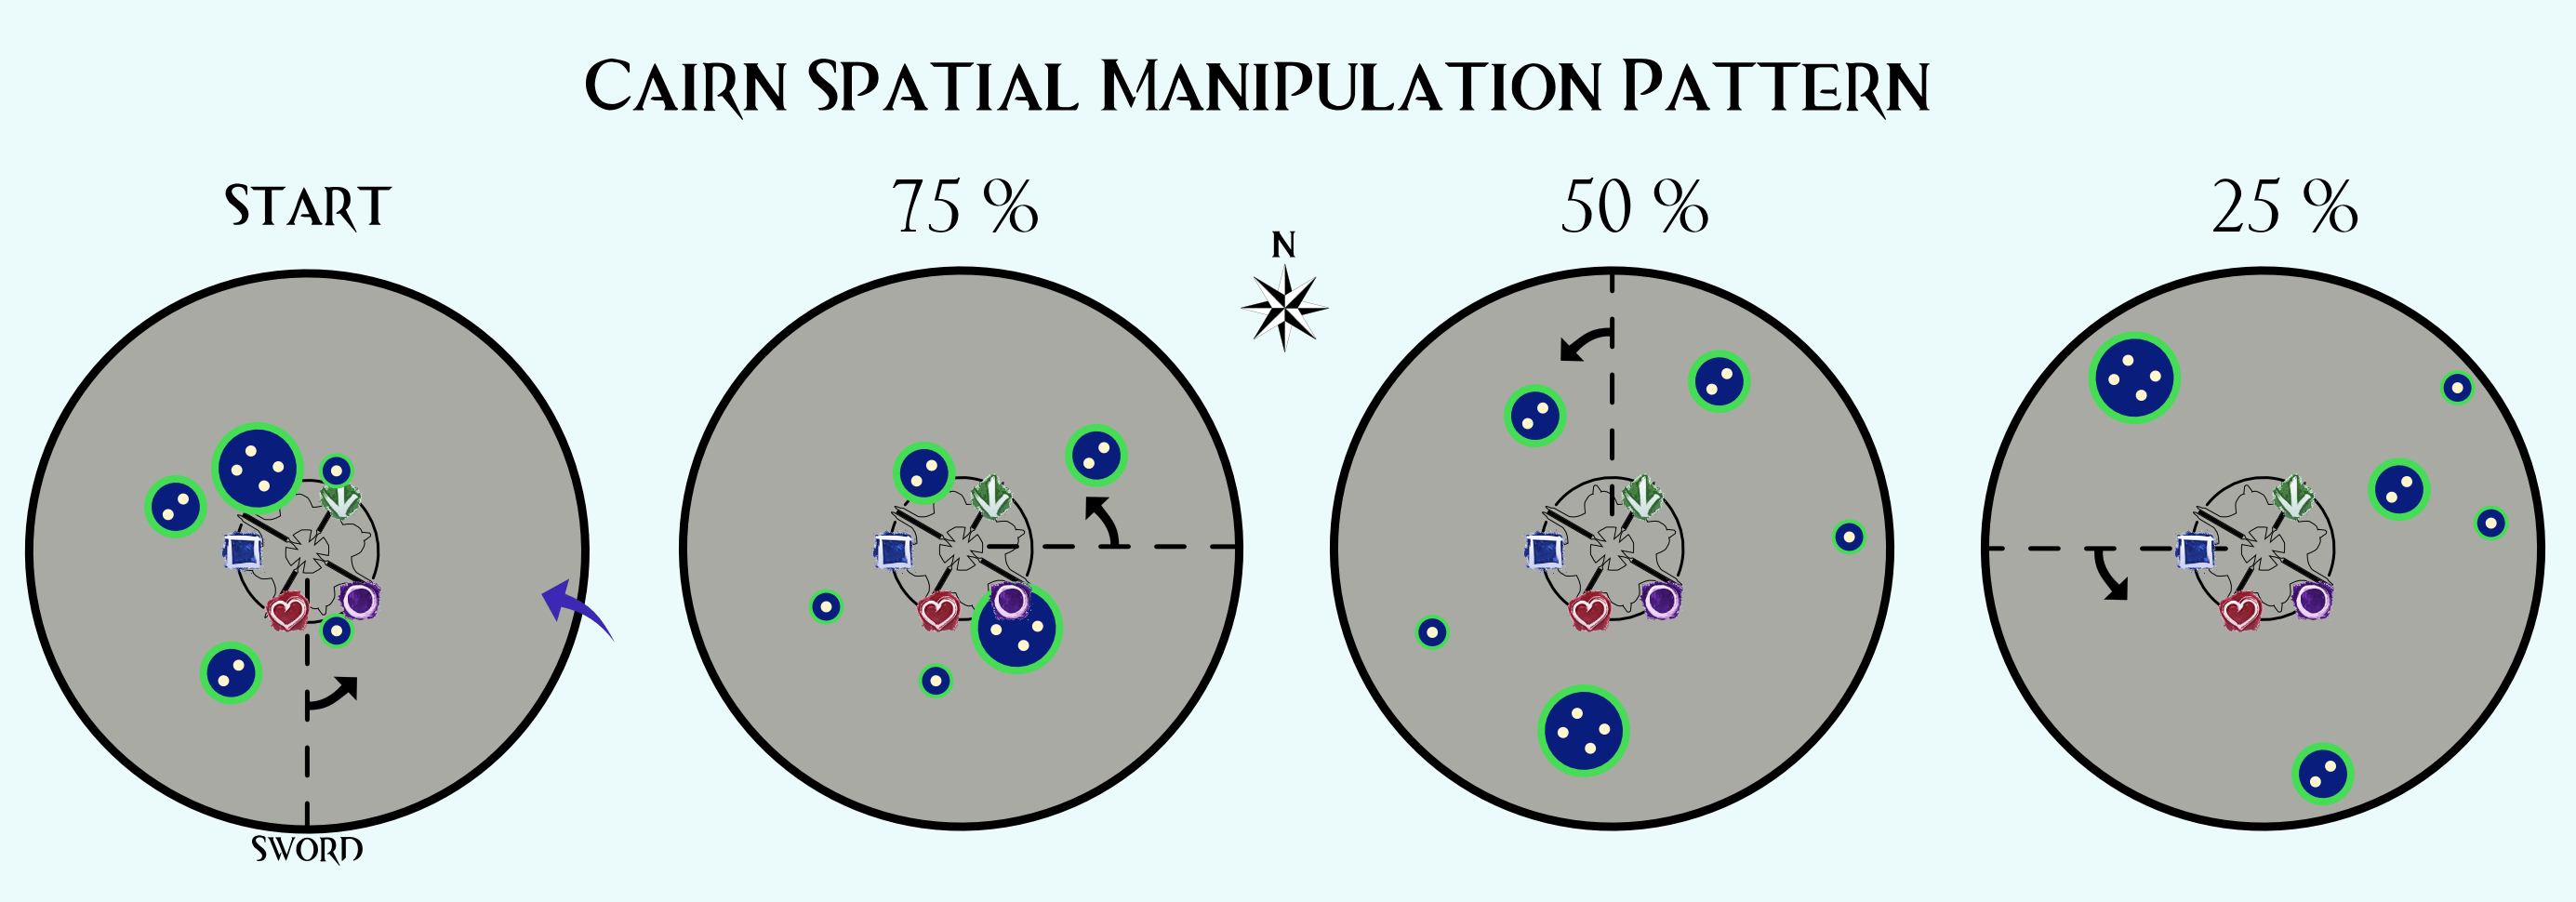 Cairn Spatial Manipulation Pattern.png